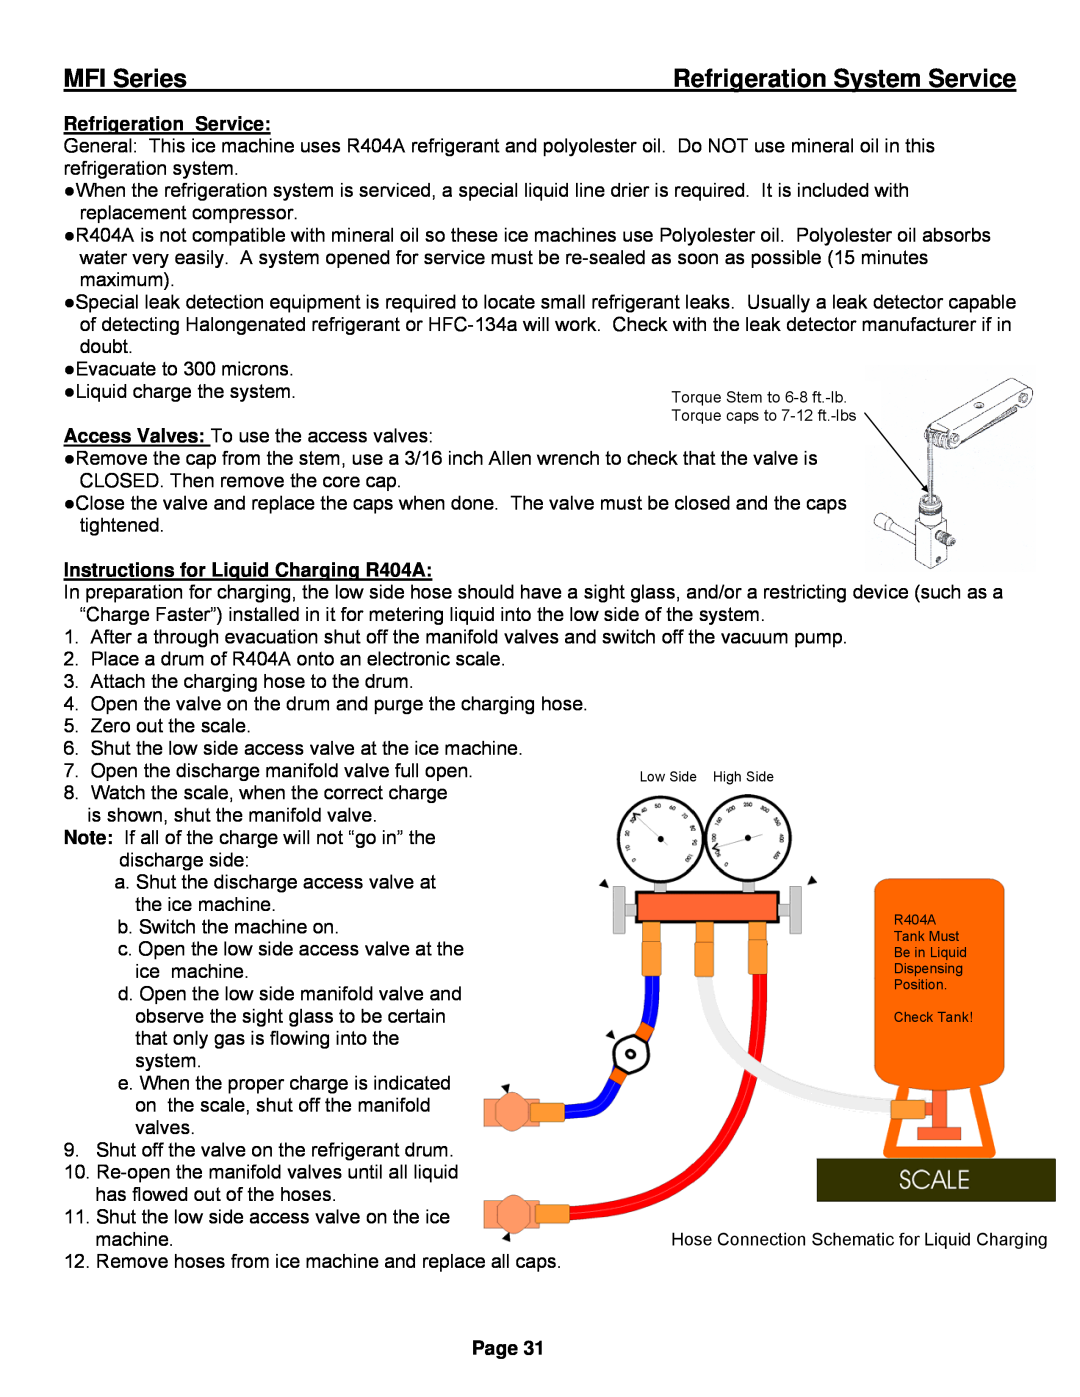 Ice-O-Matic installation manual Refrigeration System Service, Instructions for Liquid Charging R404A, MFI Series, Page 